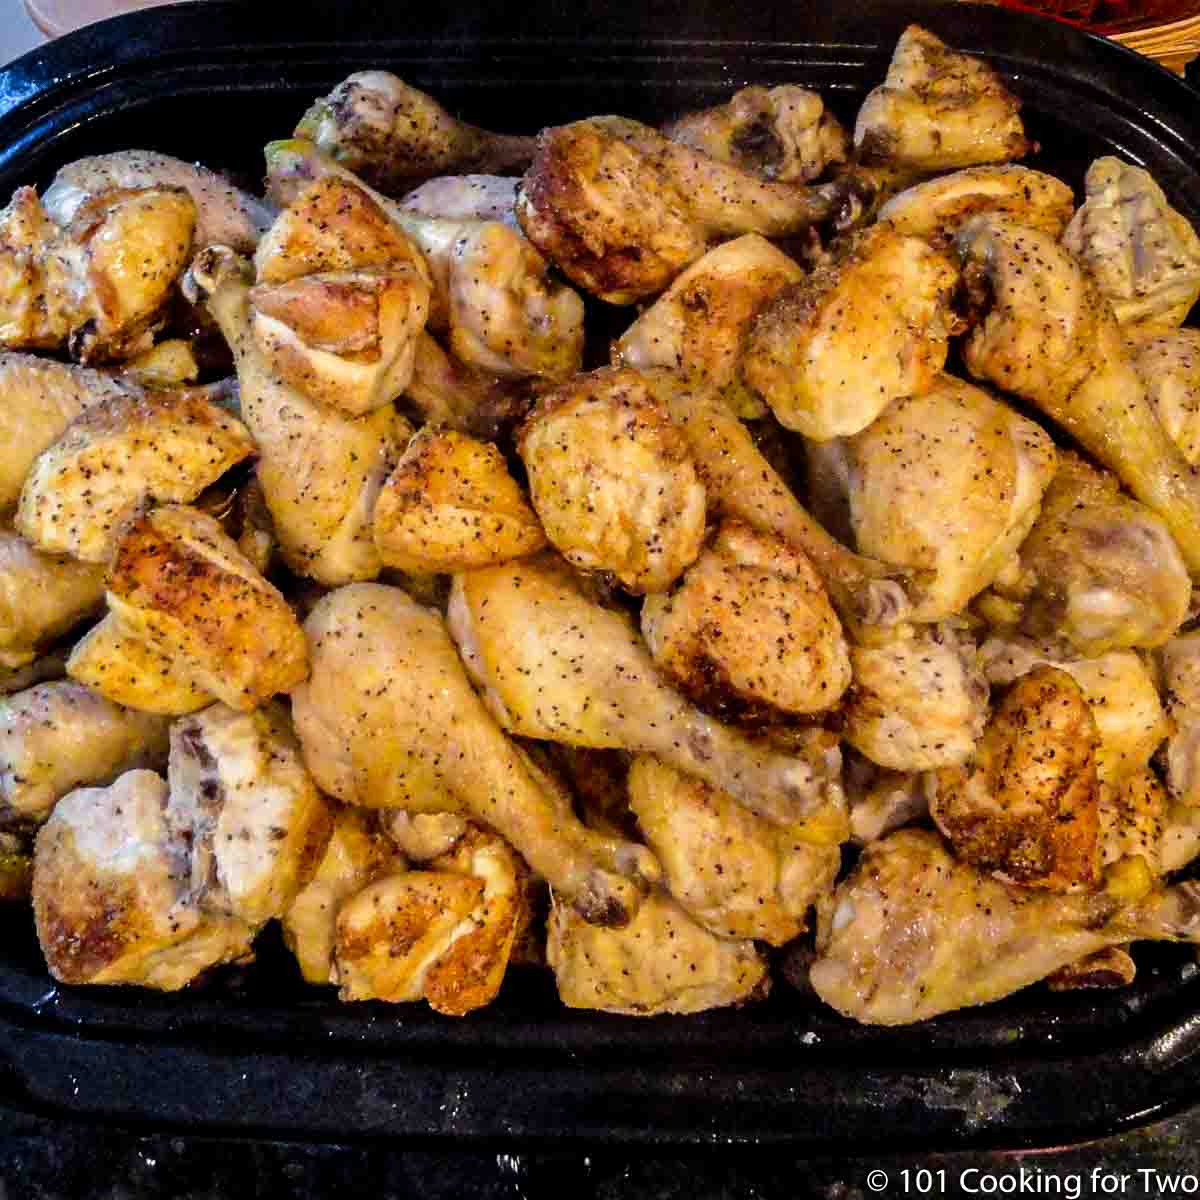 https://www.101cookingfortwo.com/wp-content/uploads/2011/06/Chicken-for-a-Hundred-1.jpg